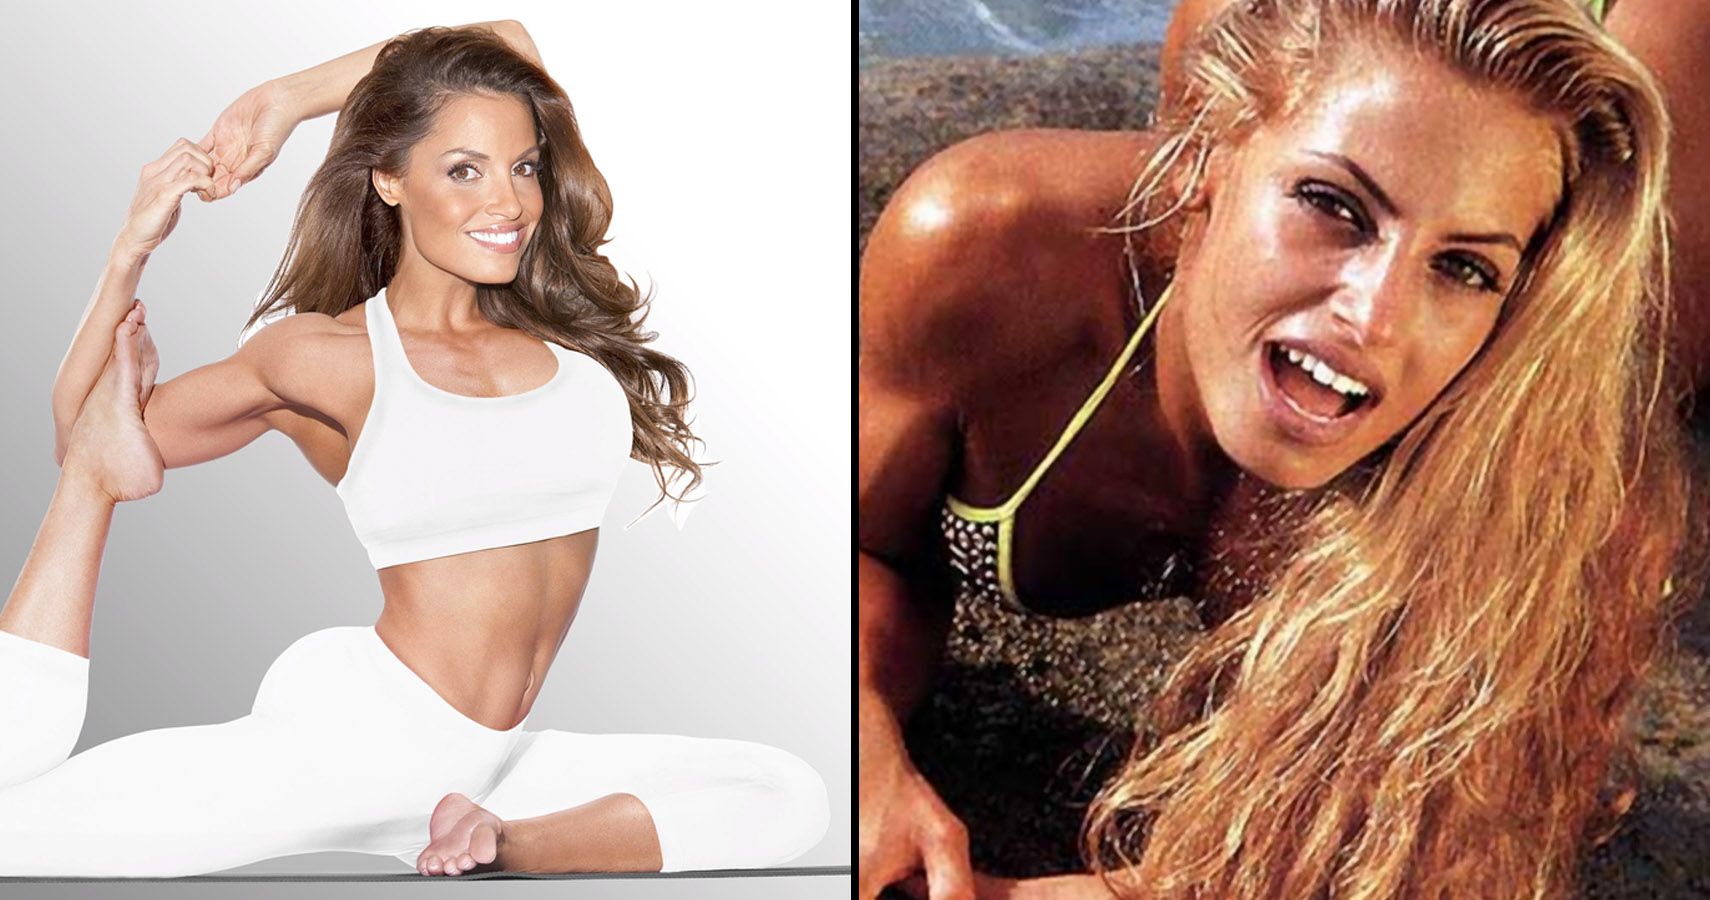 Hot Sexy Trish Stratus Xnxx - 15 Times Trish Stratus Gave Us More Than We Could Handle